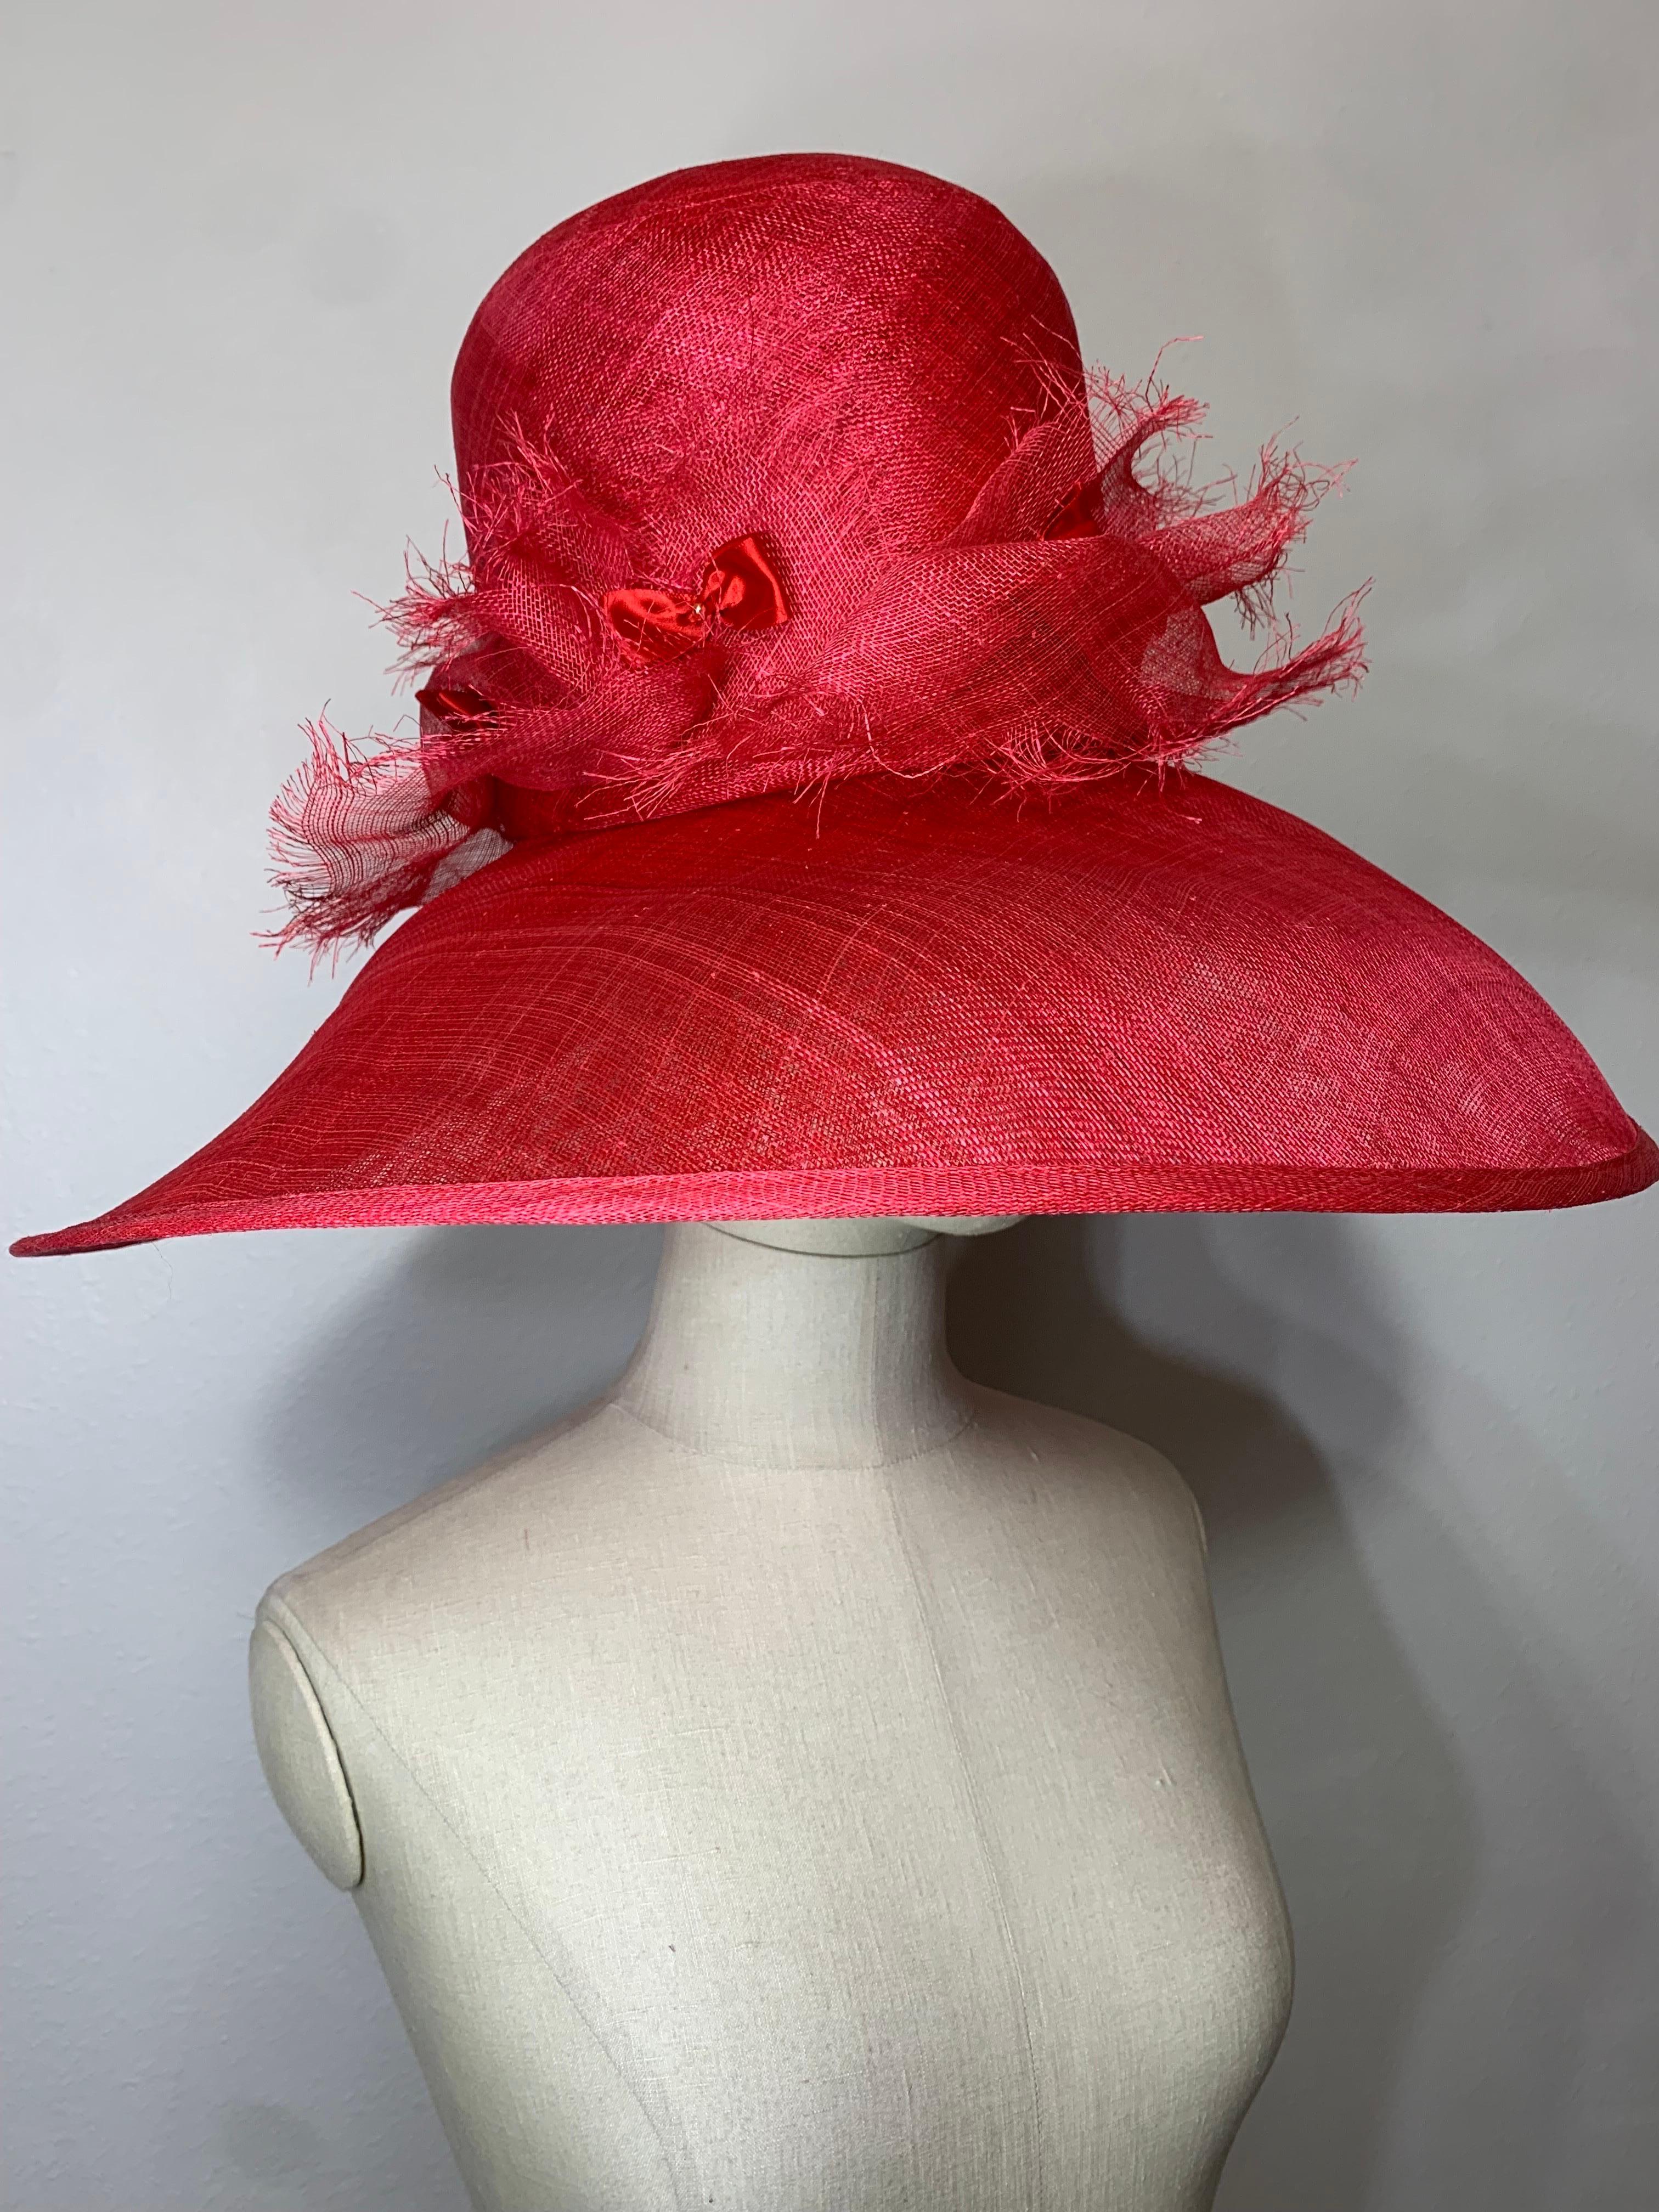 Maison Michel Cardinal Red Sheer Straw Wide Brim Tall Crown Hat w Satin Bows In Excellent Condition For Sale In Gresham, OR